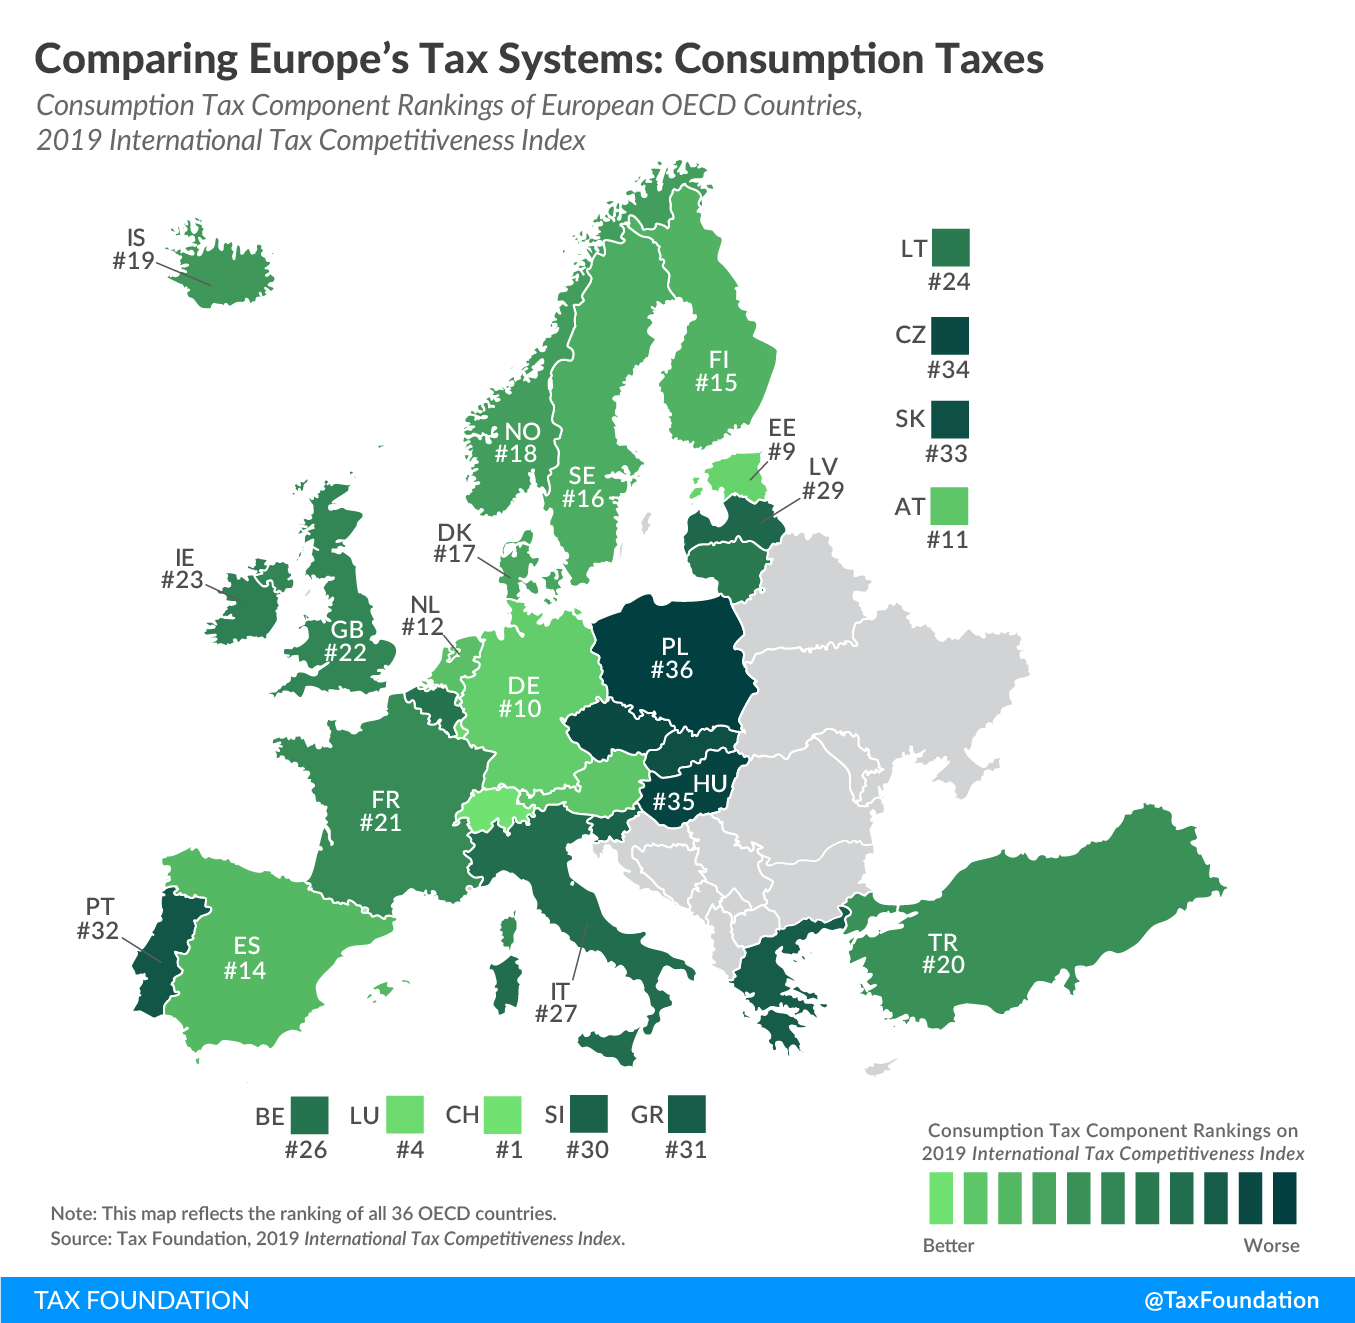 worst consumption tax system in the OECD, worst consumption tax system in Europe, best consumption tax system in Europe, best consumption tax system in the oecd